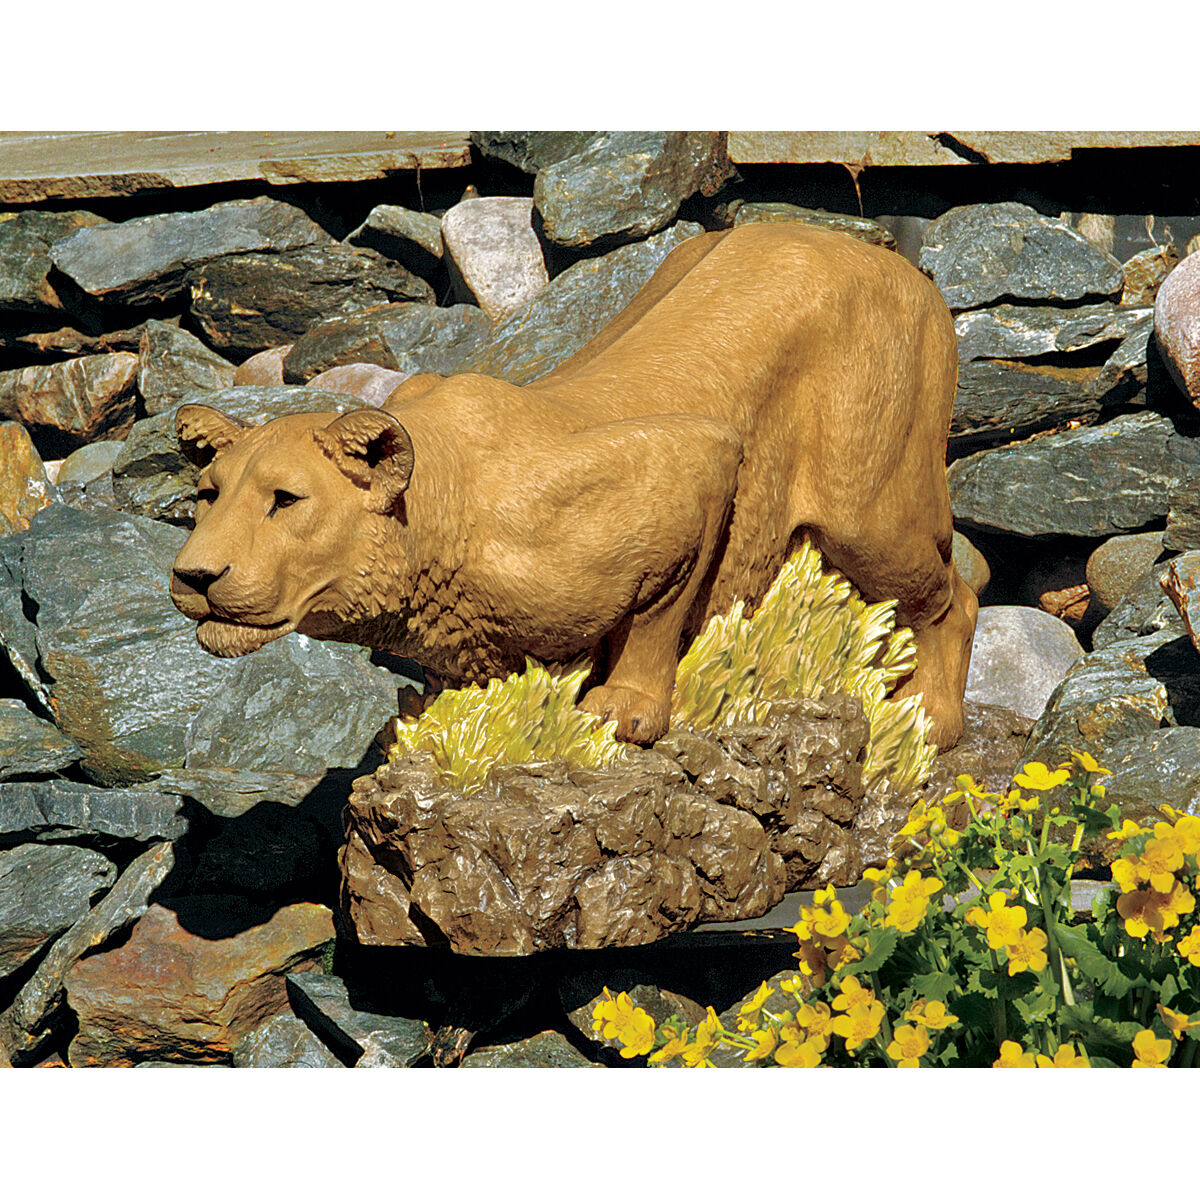 Prowling Pounce Regal Queen of the Jungle Hand Painted Lioness Garden Sculpture